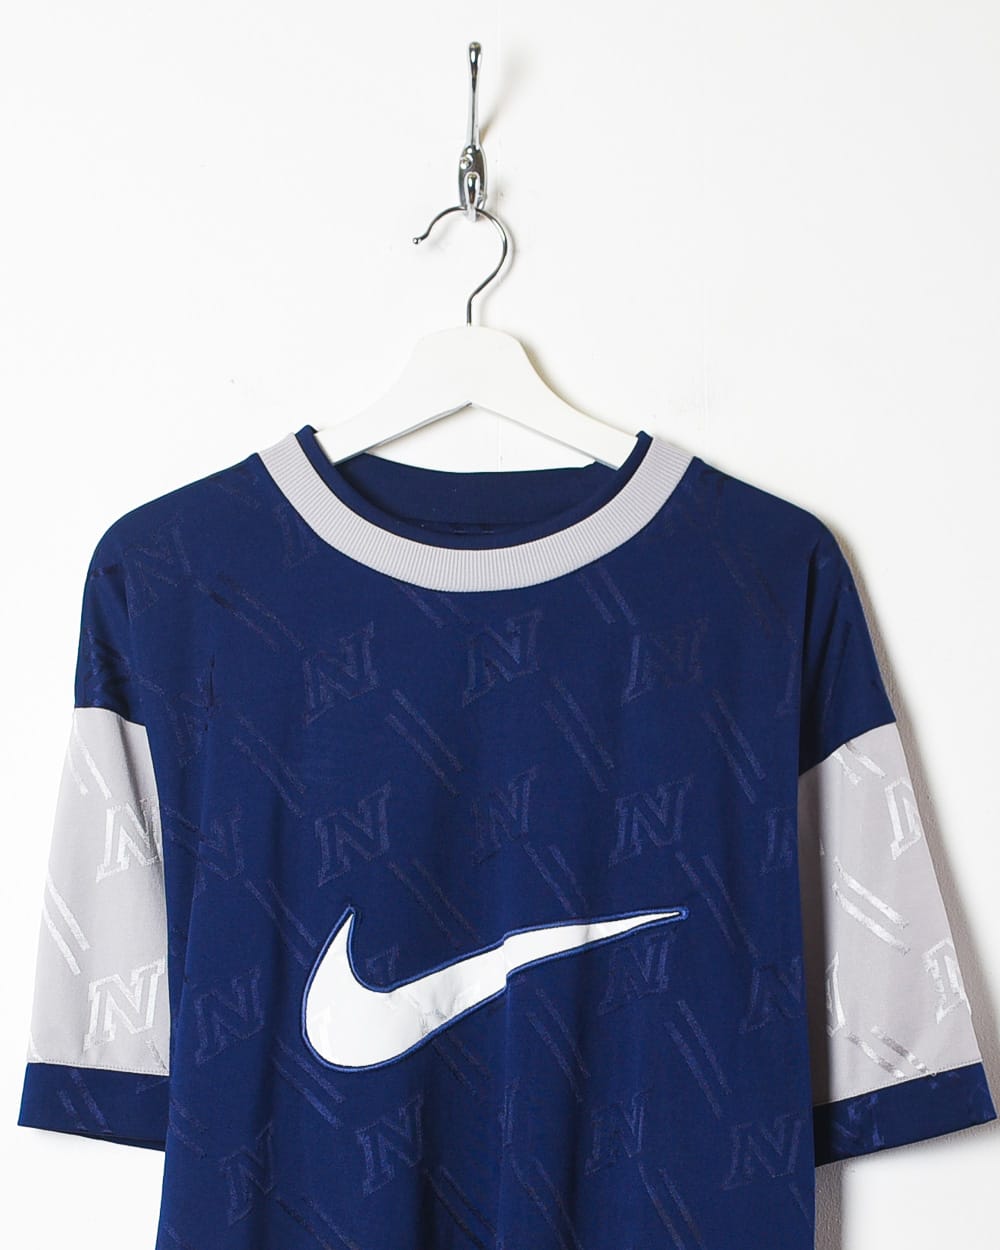 Navy Nike All Over Print T-Shirt - X-Large